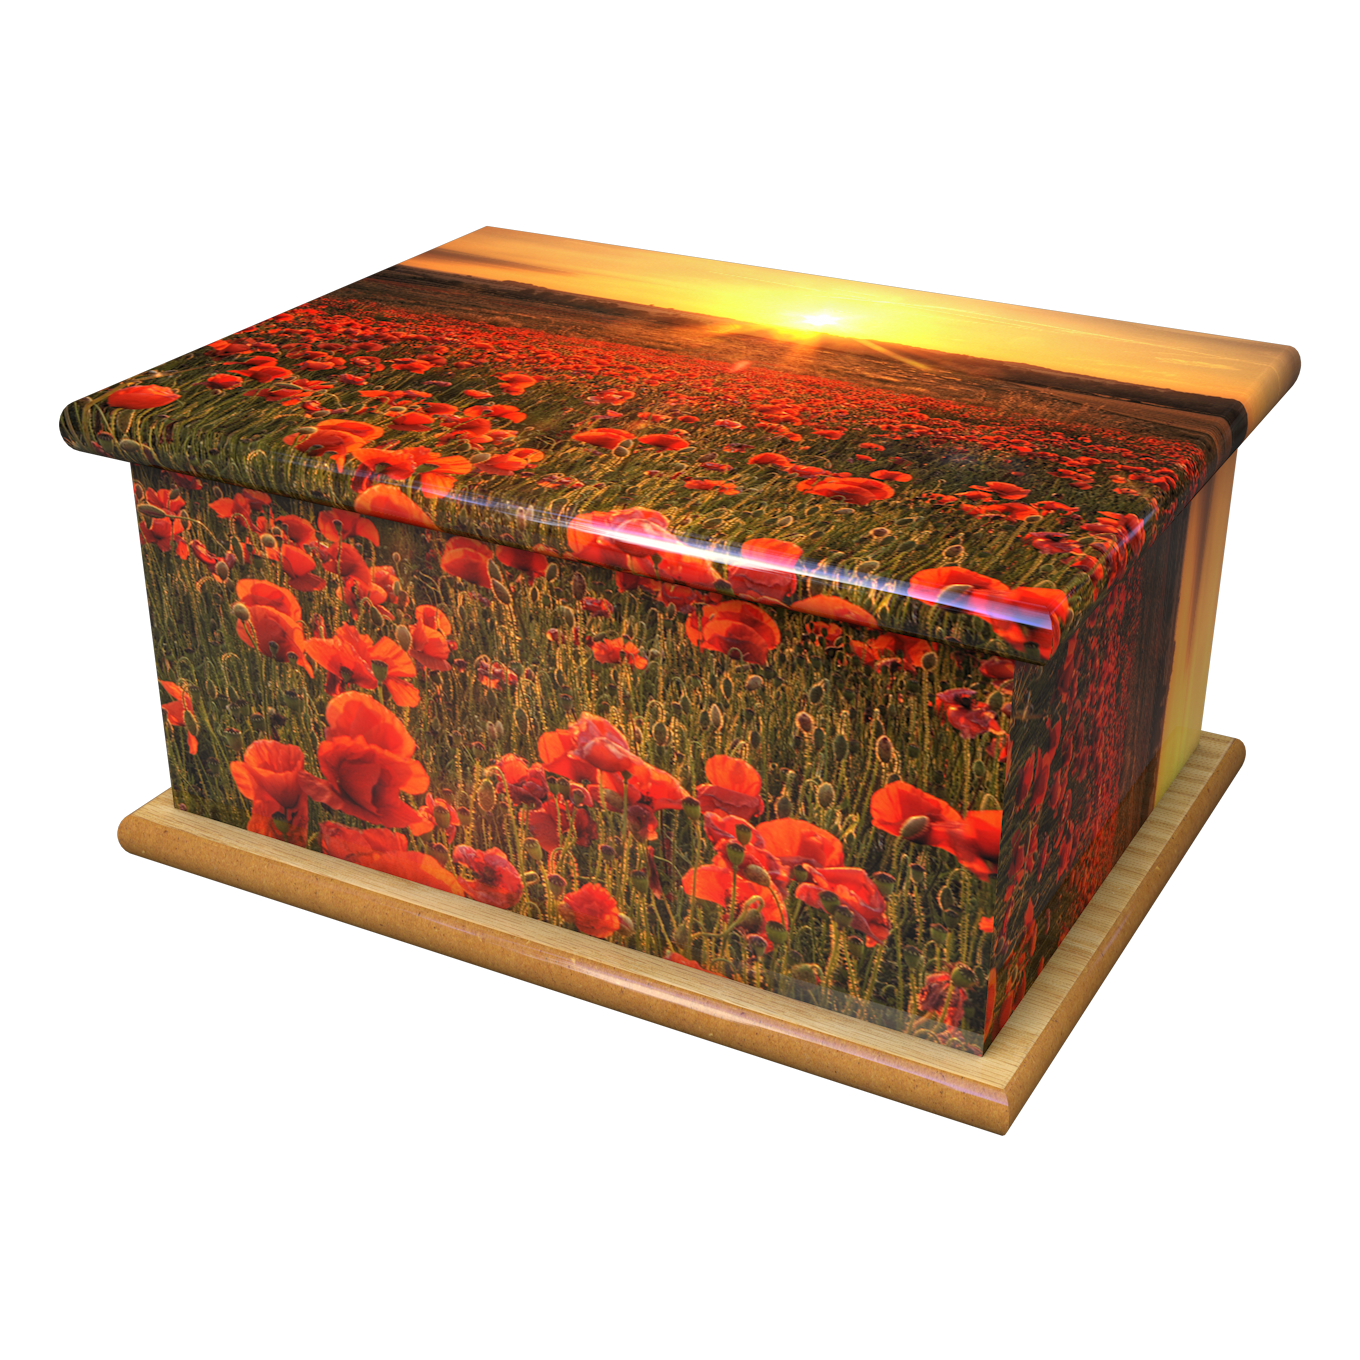 Remember it - Poppy Sunset Wooden Cremation Ashes Urn Adult